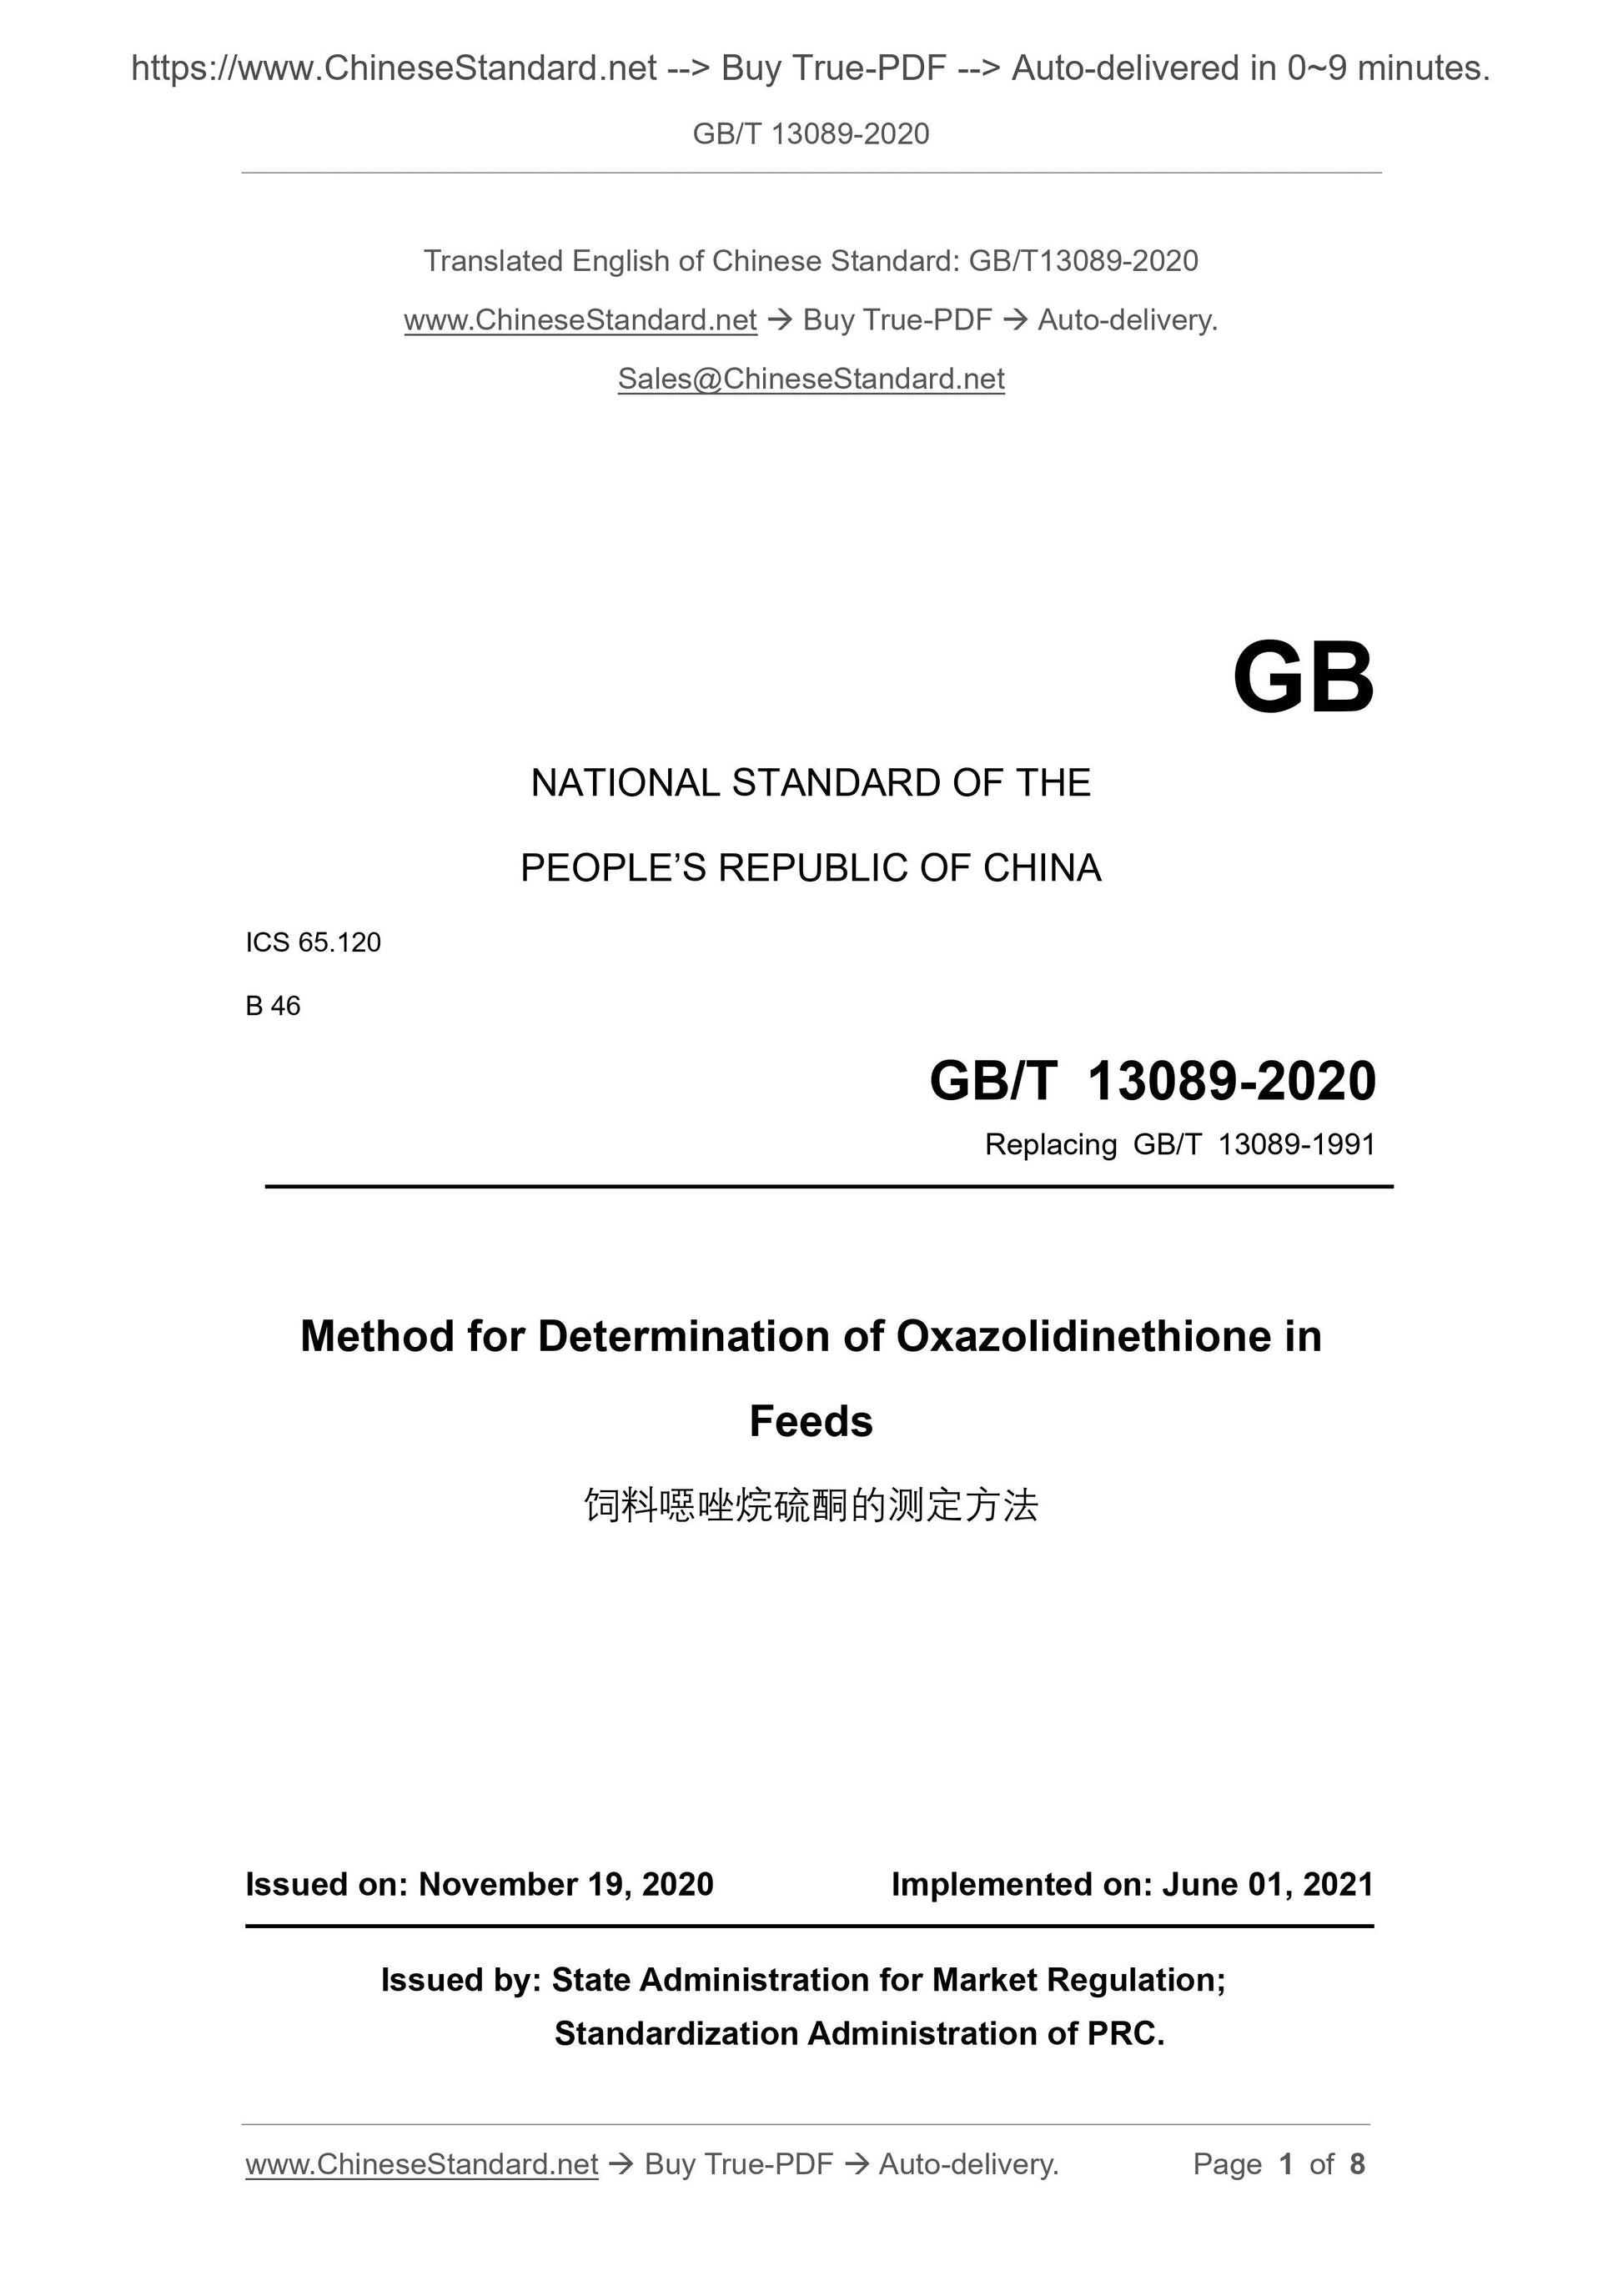 GB/T 13089-2020 Page 1